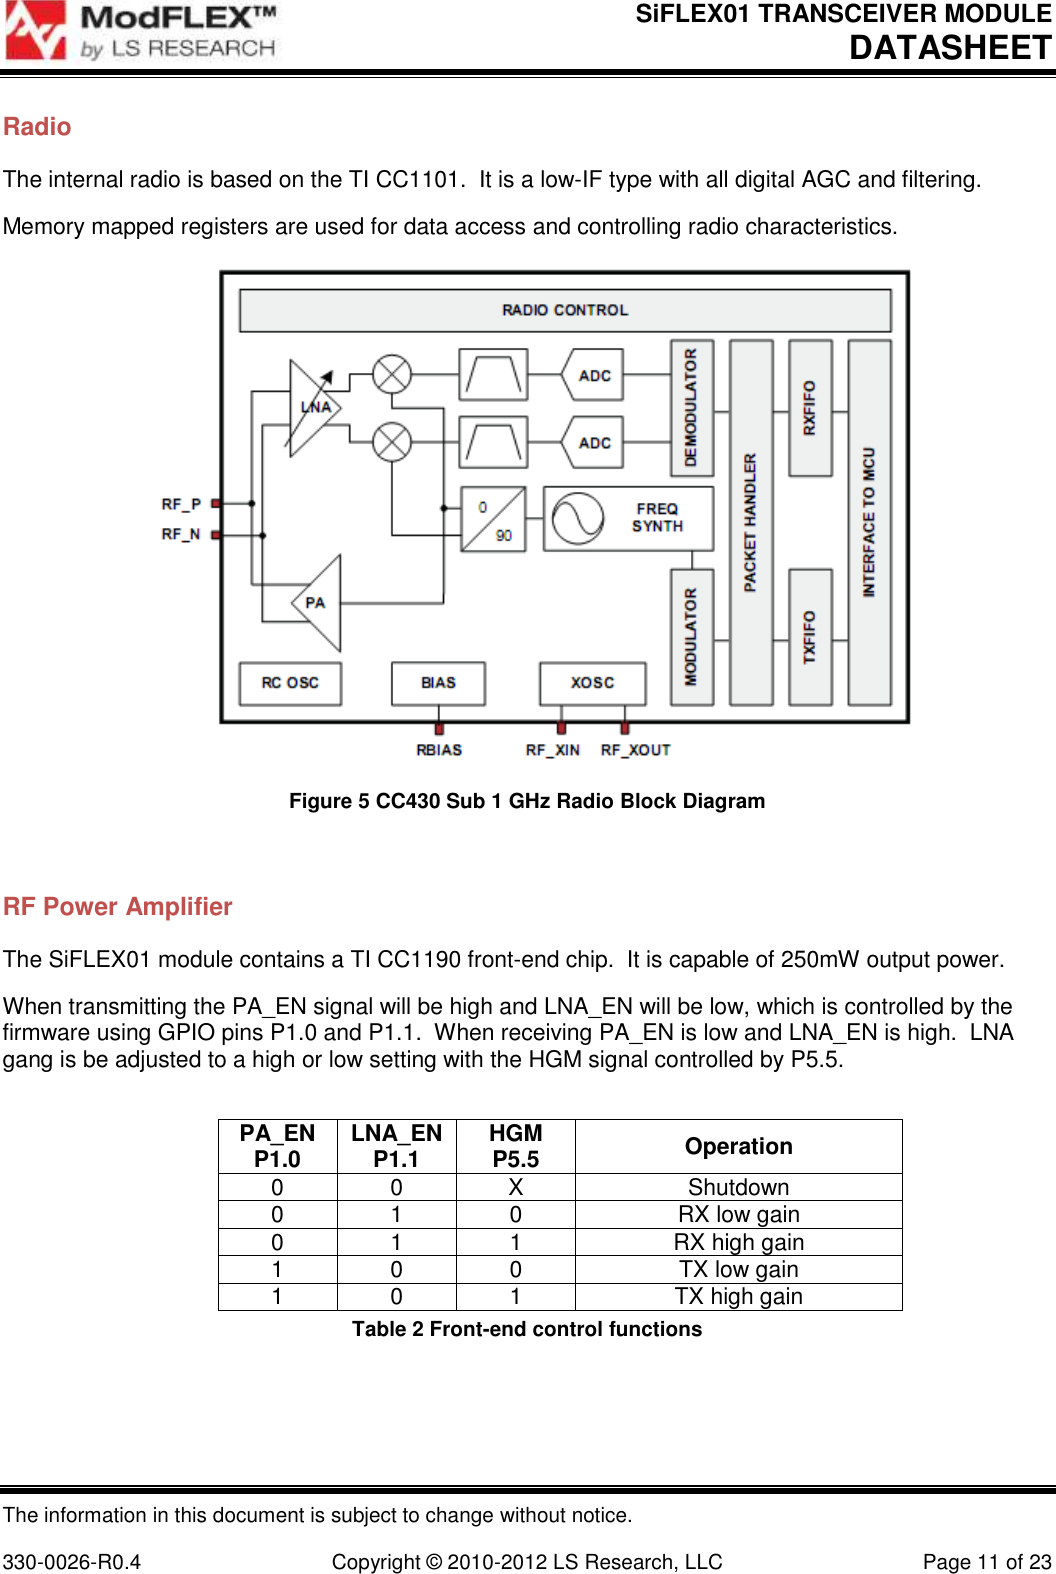 SiFLEX01 TRANSCEIVER MODULE DATASHEET The information in this document is subject to change without notice.  330-0026-R0.4  Copyright © 2010-2012 LS Research, LLC  Page 11 of 23 Radio The internal radio is based on the TI CC1101.  It is a low-IF type with all digital AGC and filtering. Memory mapped registers are used for data access and controlling radio characteristics.  Figure 5 CC430 Sub 1 GHz Radio Block Diagram  RF Power Amplifier The SiFLEX01 module contains a TI CC1190 front-end chip.  It is capable of 250mW output power. When transmitting the PA_EN signal will be high and LNA_EN will be low, which is controlled by the firmware using GPIO pins P1.0 and P1.1.  When receiving PA_EN is low and LNA_EN is high.  LNA gang is be adjusted to a high or low setting with the HGM signal controlled by P5.5.  PA_EN P1.0 LNA_EN P1.1 HGM P5.5 Operation 0 0 X Shutdown 0 1 0 RX low gain 0 1 1 RX high gain 1 0 0 TX low gain 1 0 1 TX high gain Table 2 Front-end control functions   